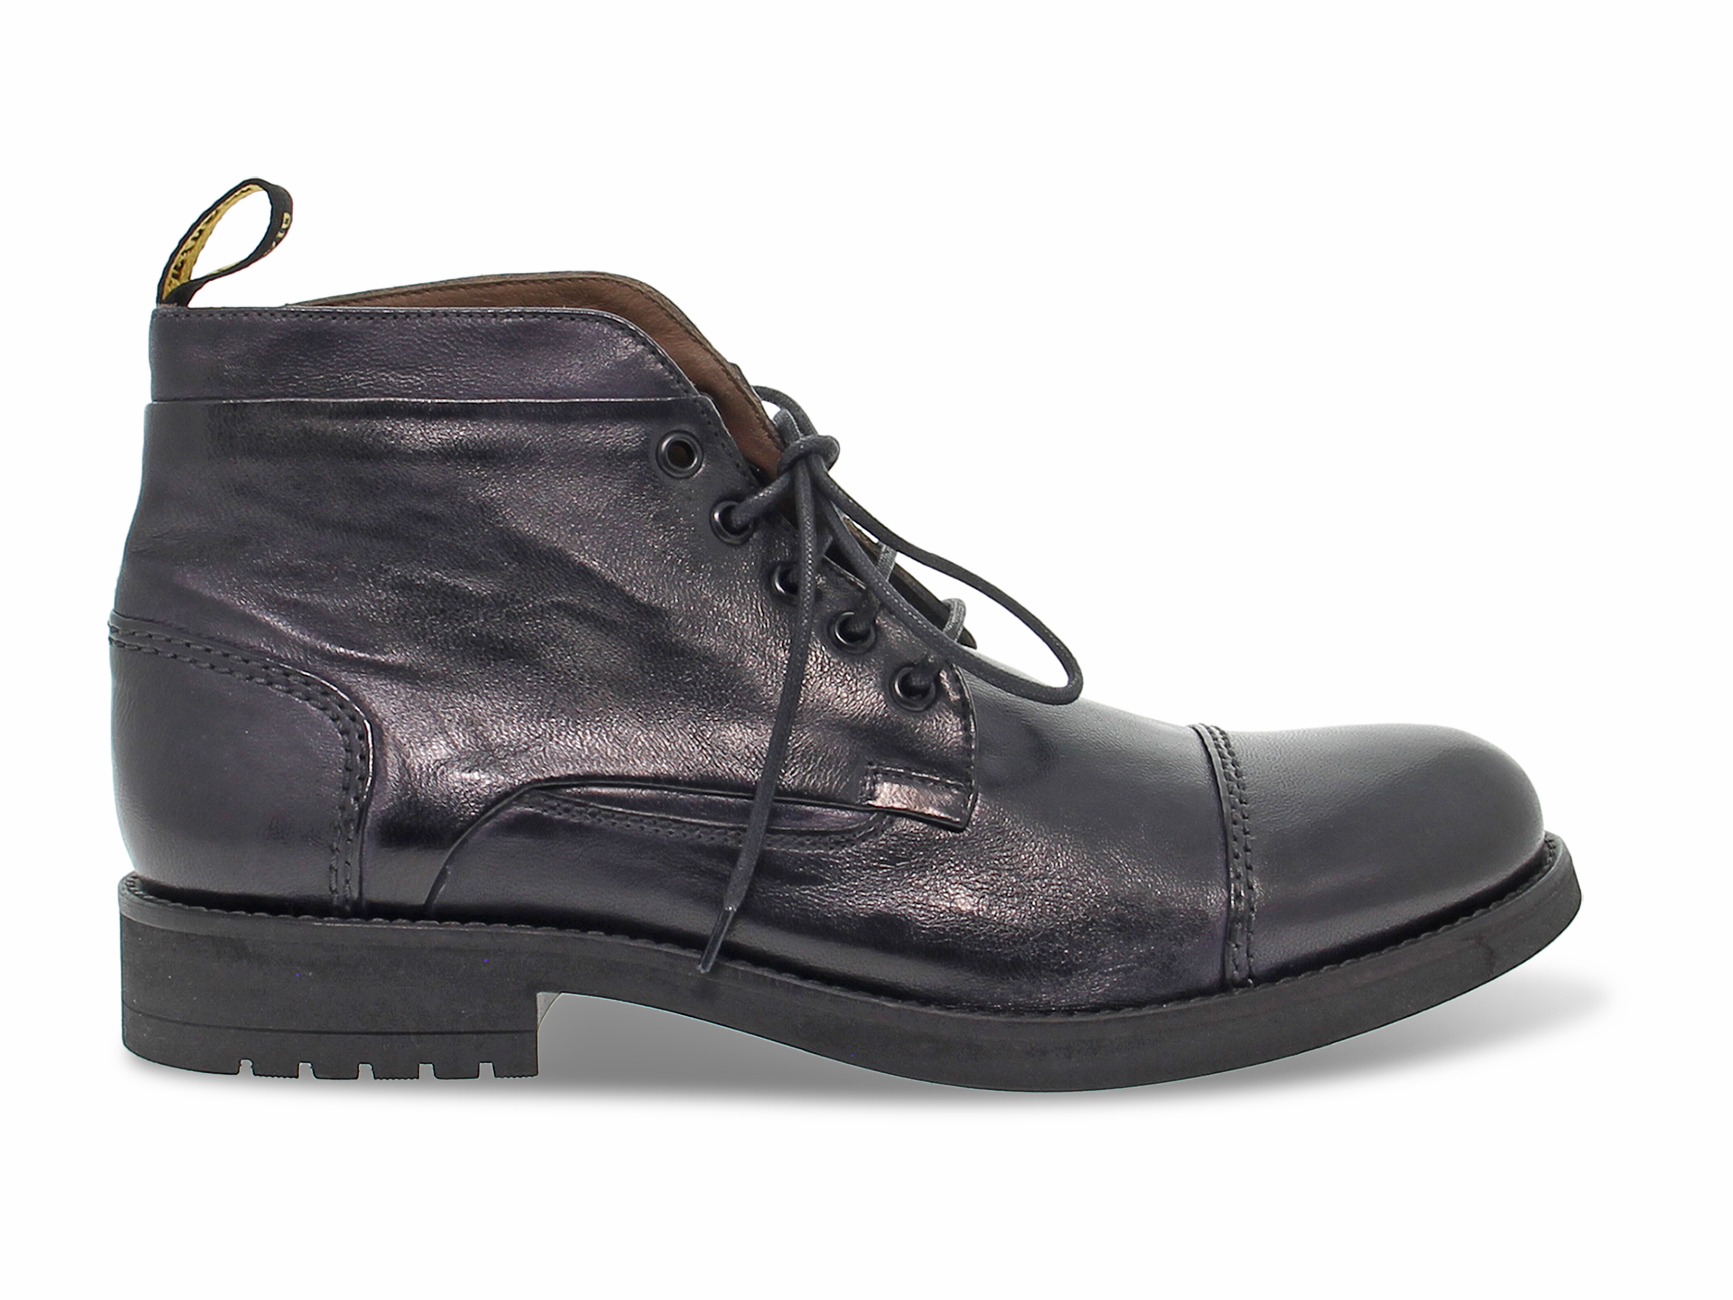 Ankle boot Jp David STILE INGLESE in anthracite leather - Guidi ...